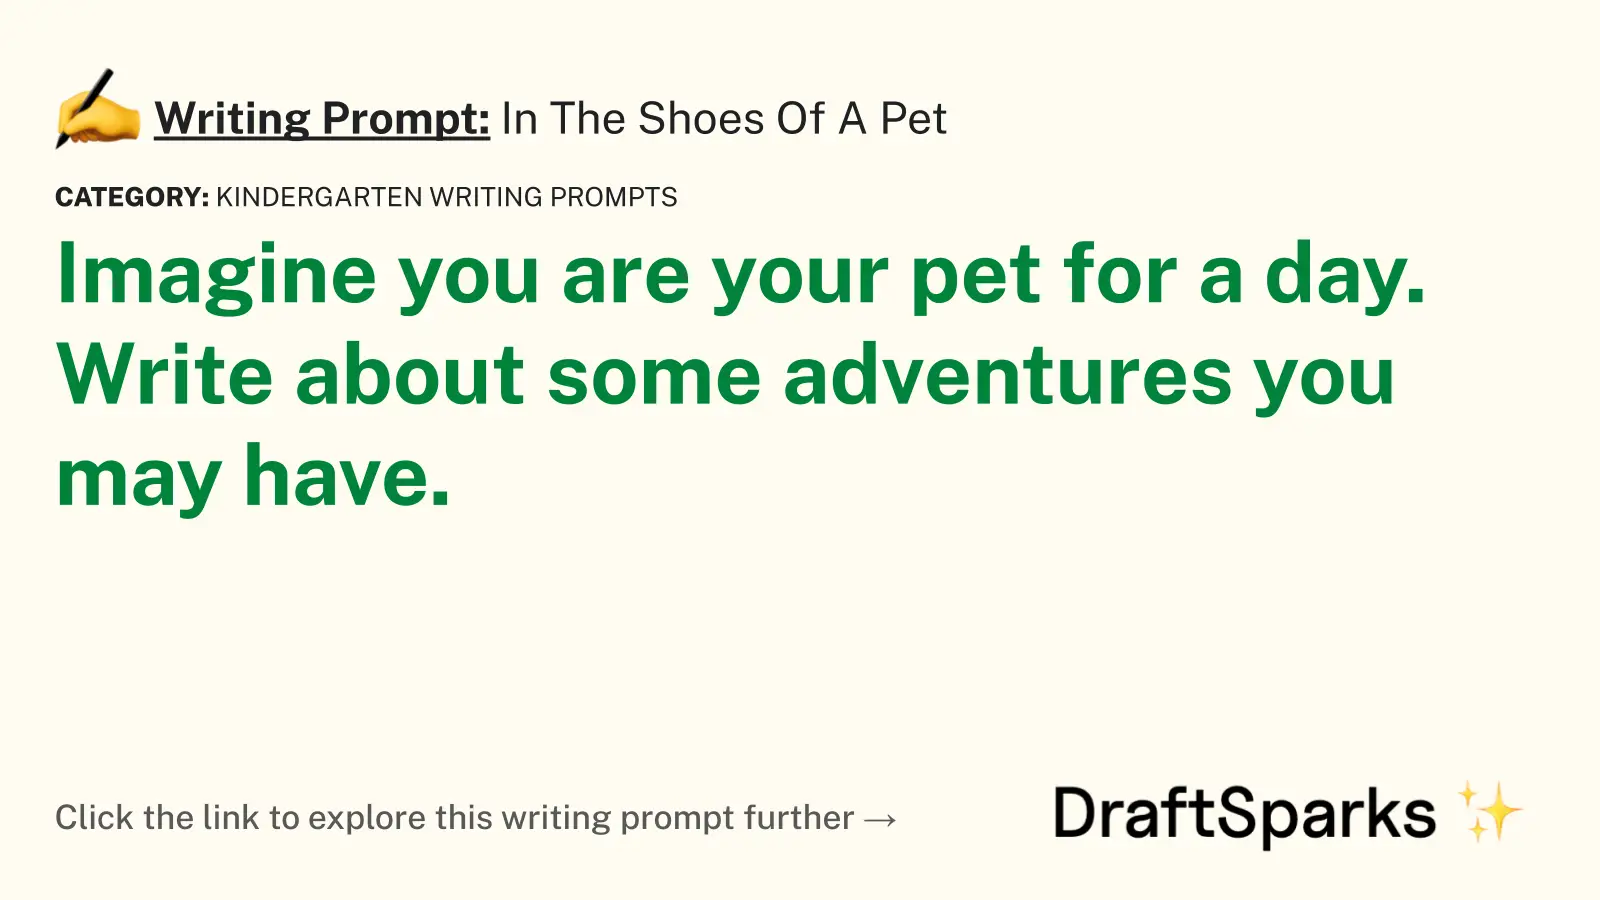 In The Shoes Of A Pet